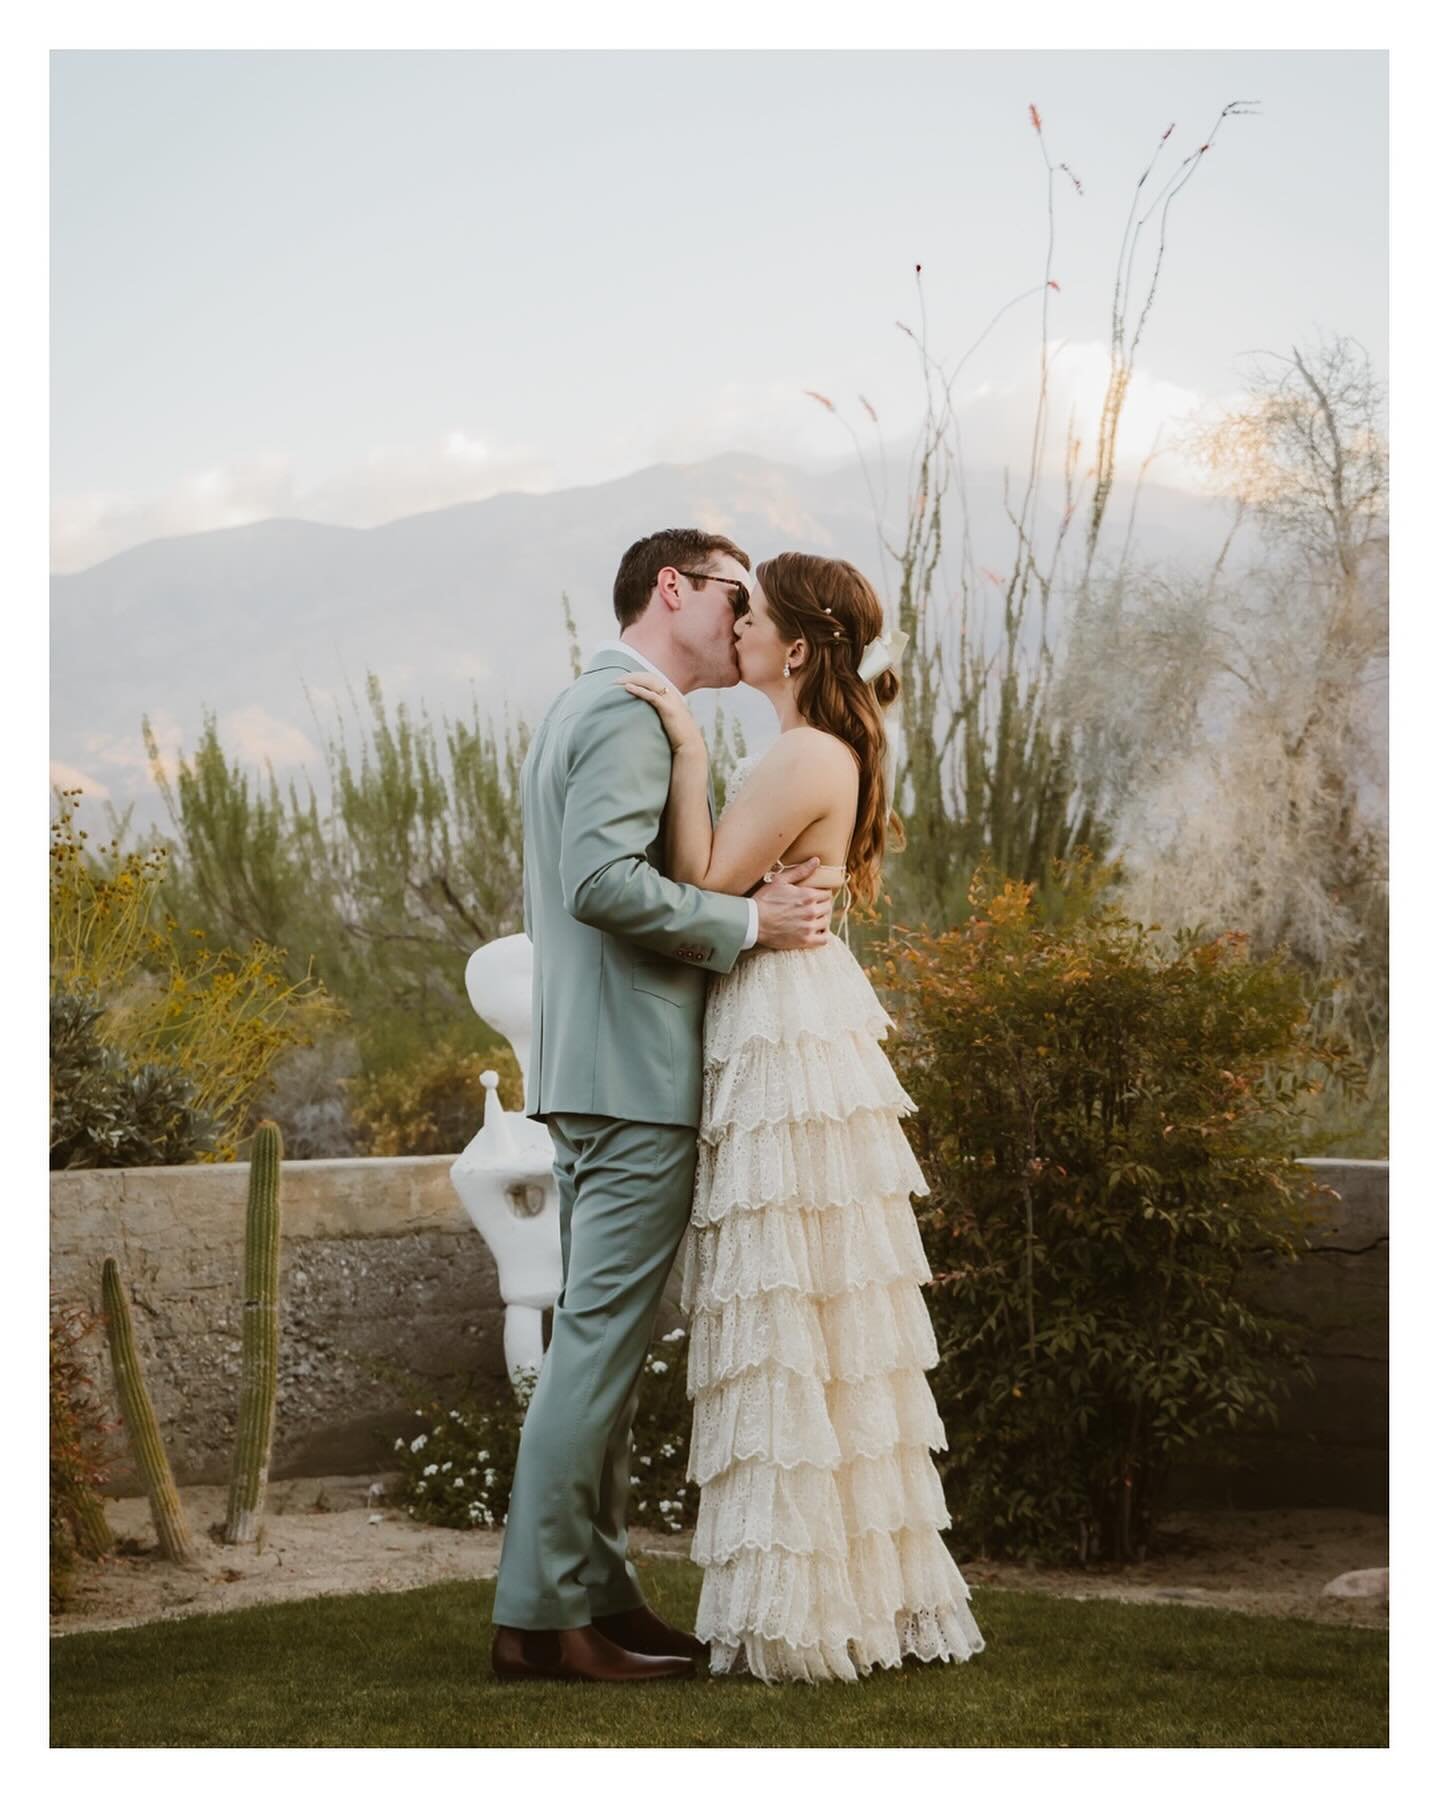 Smoke Tree Ranch was hit HARD with romance last weekend

🧡Your highlight gallery is in your email inbox @swenzlau @nickrabino🧡

#weddingphotography #weddingphotographer #socalcouplesphotographer #socalweddingphotographer #californiawedding #califor